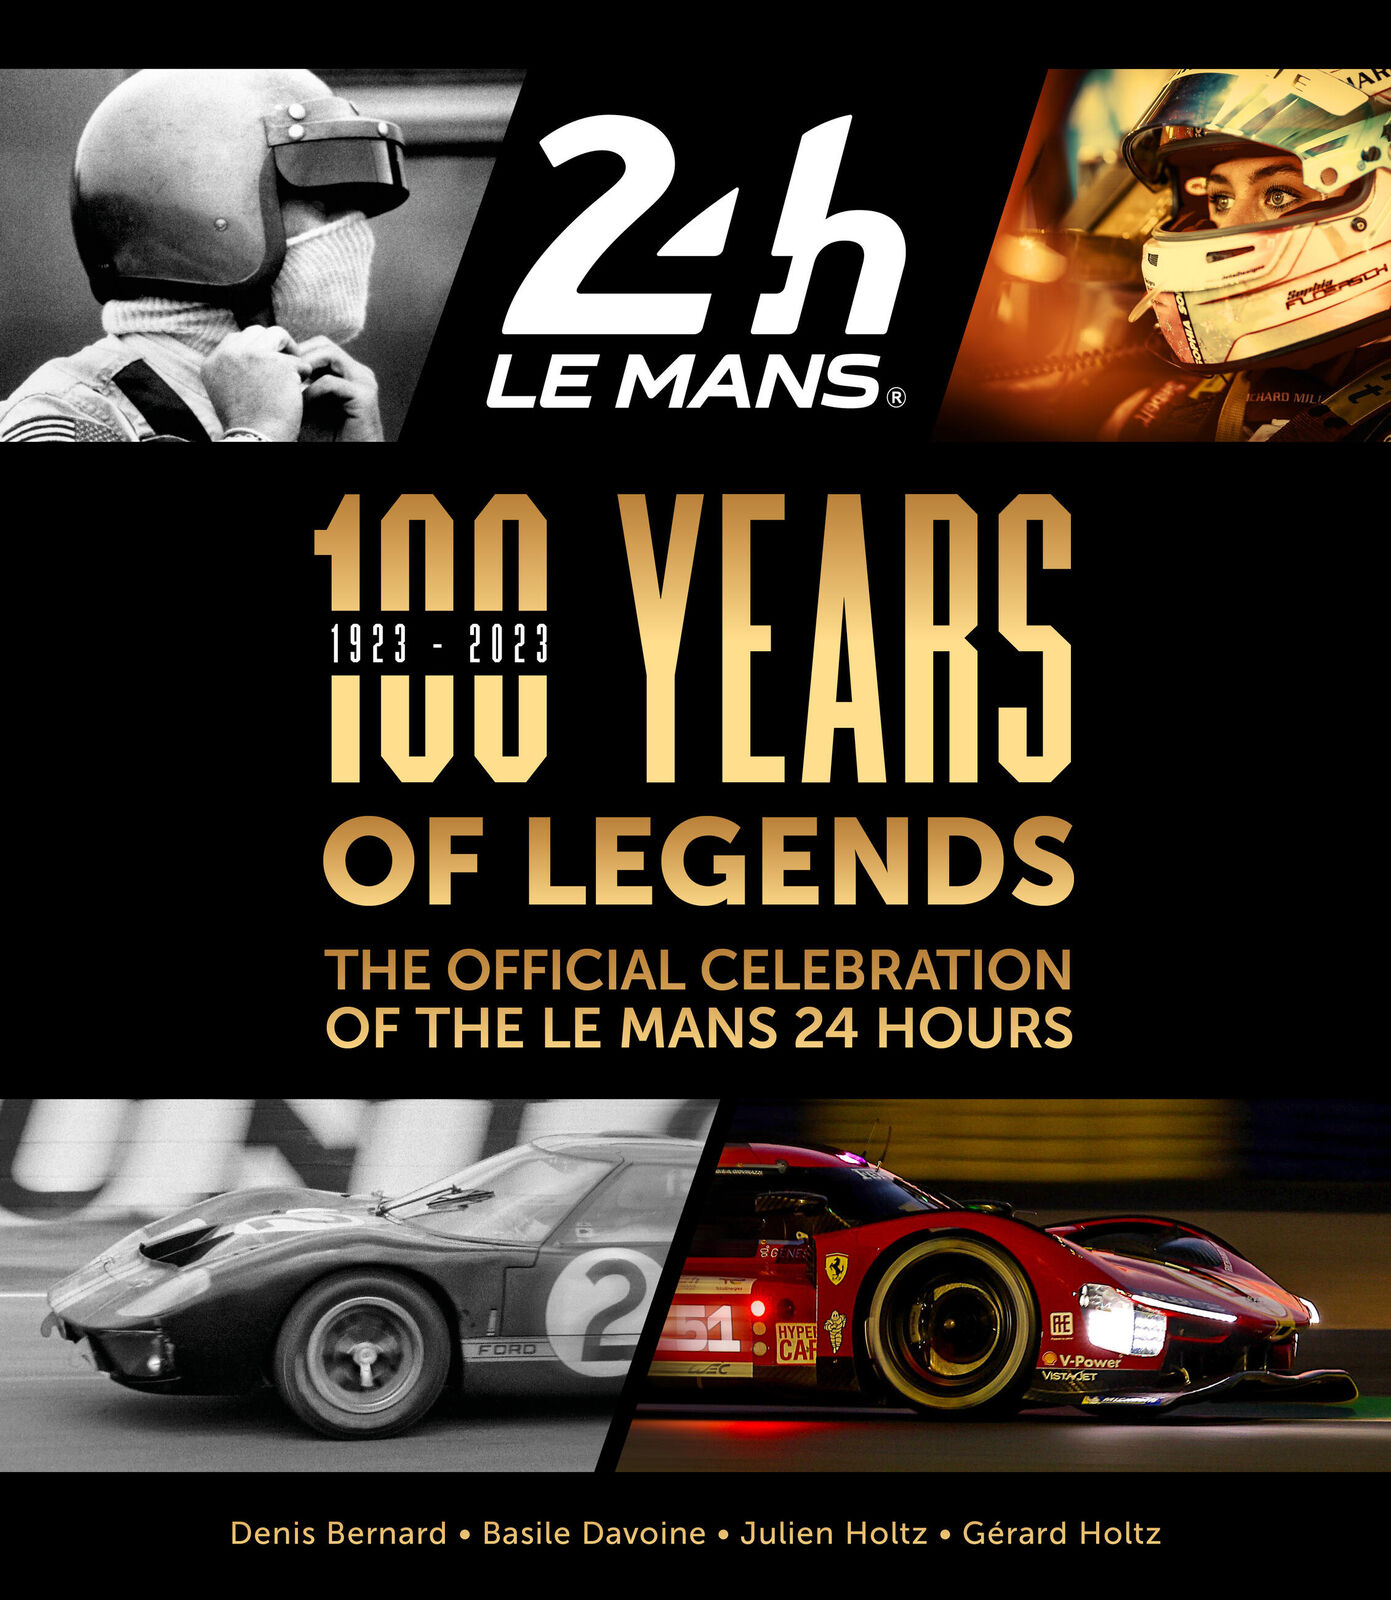 The Official Celebration of the Le Mans 24 Hours 100 Years of Legends book